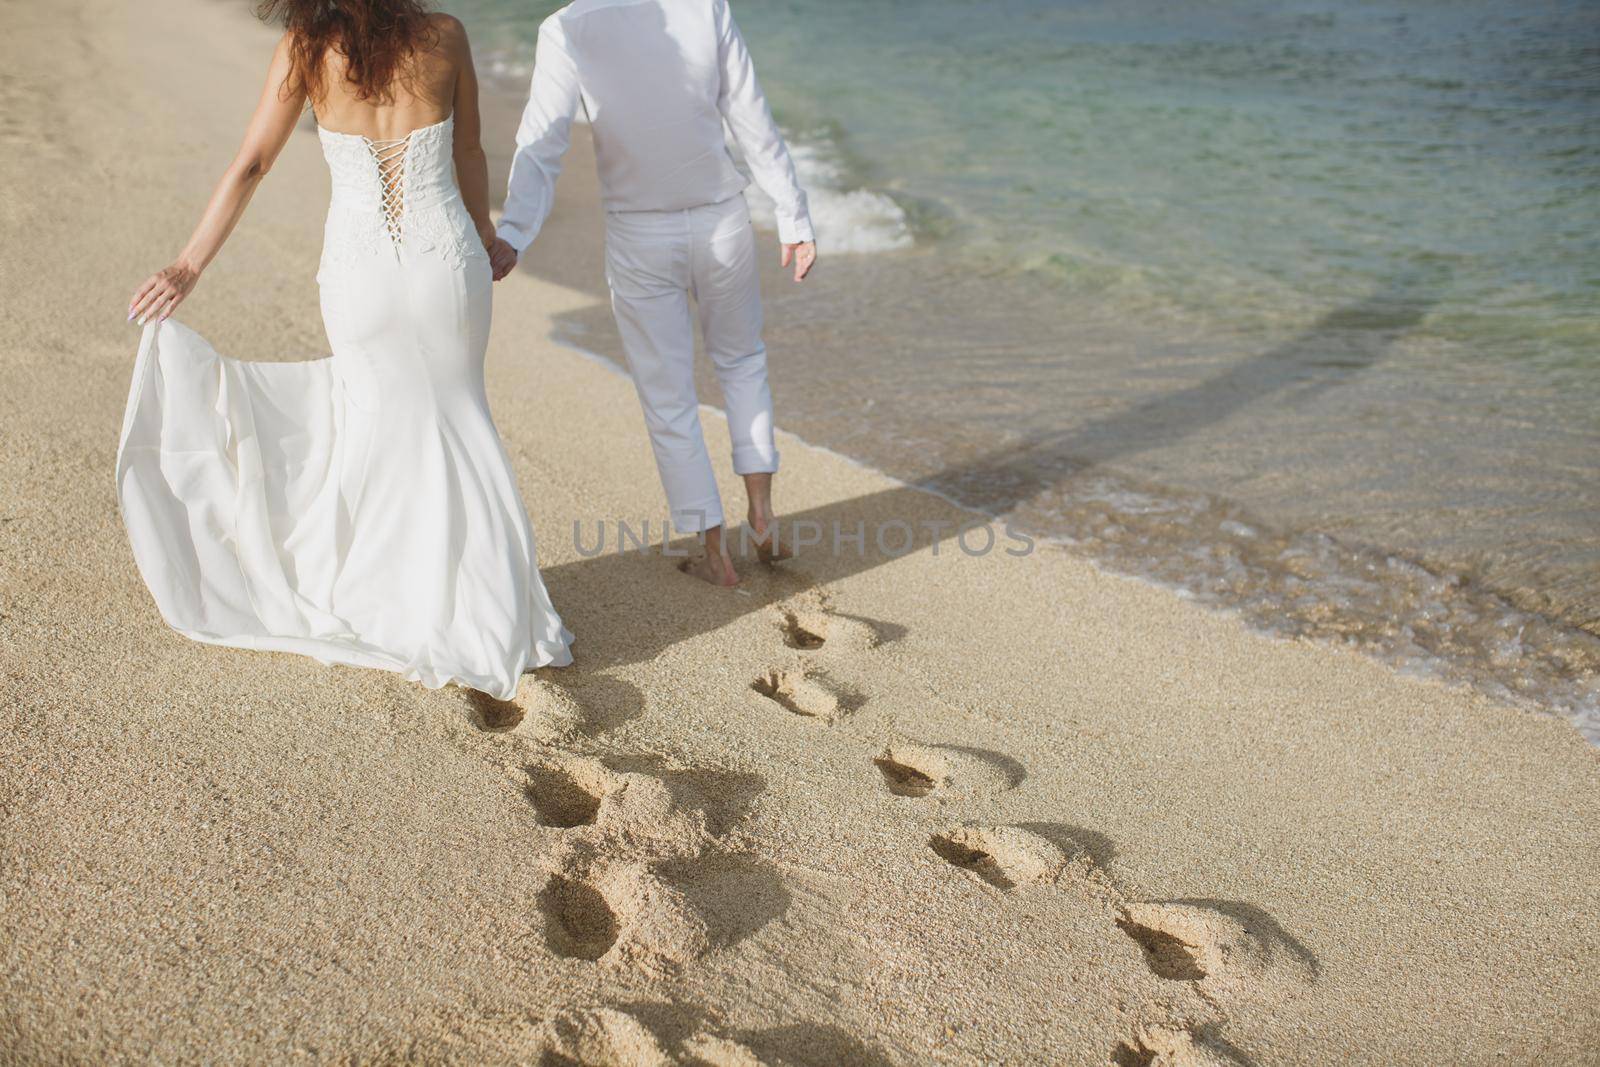 The bride and groom walk hand in the sand. footprints in the sand near the ocean. by StudioPeace